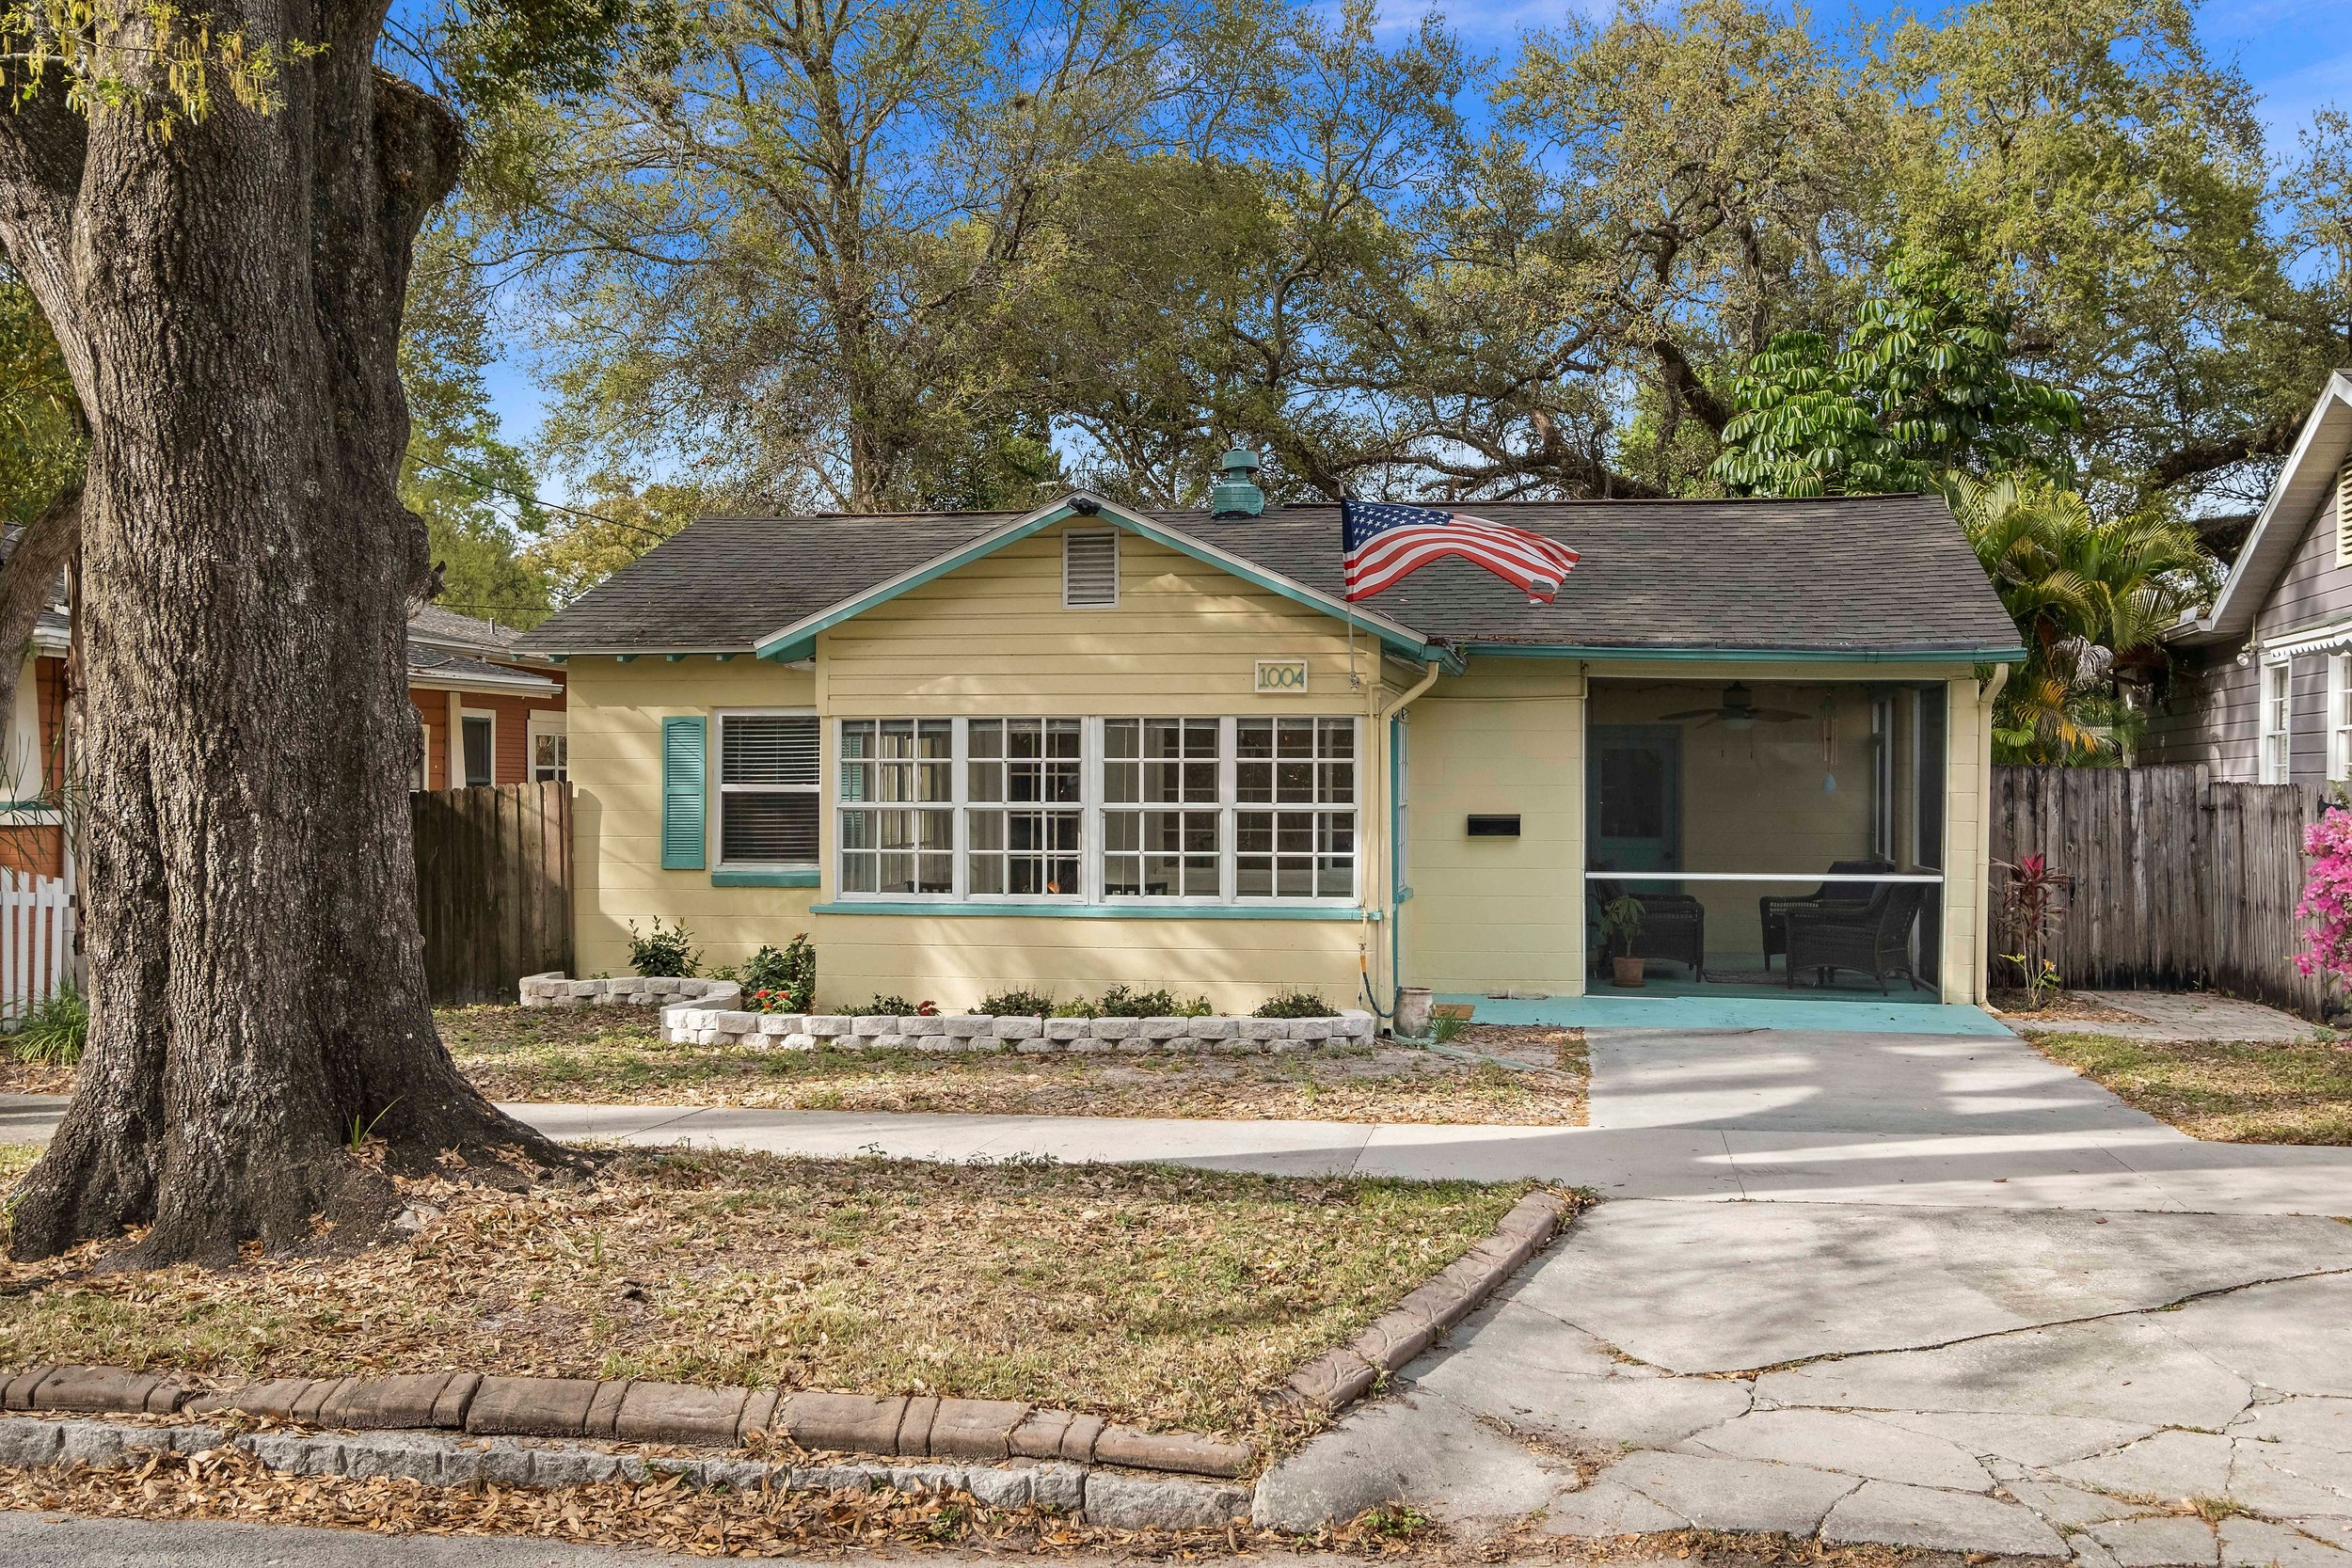 1004 E Broad Street - Old Seminole Heights - SOLD in April, 2021